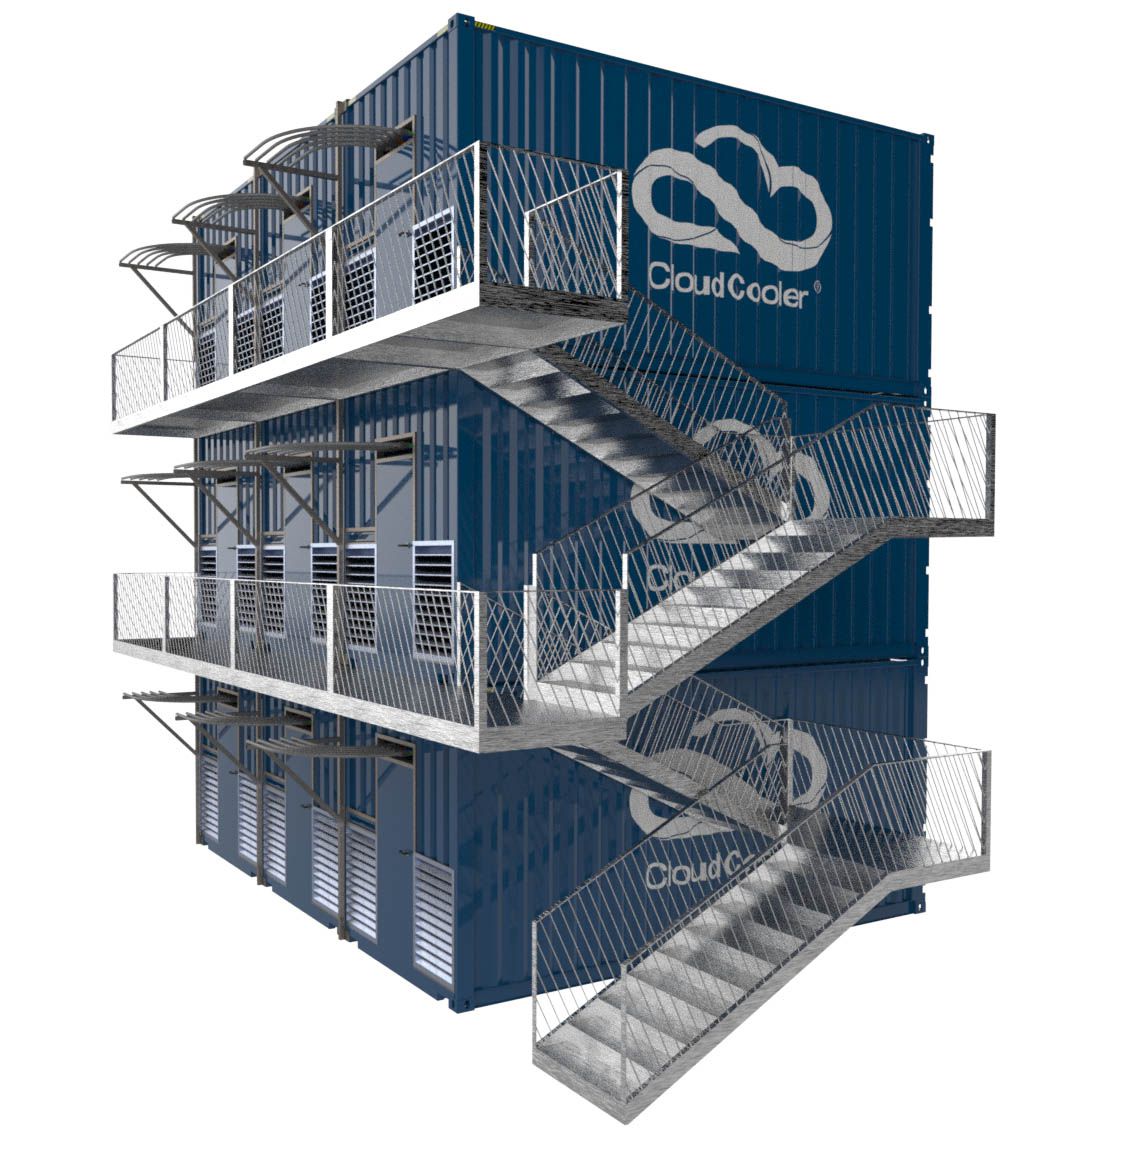 HPC Data Container. Modular prefab system to create a hyper scale data centre